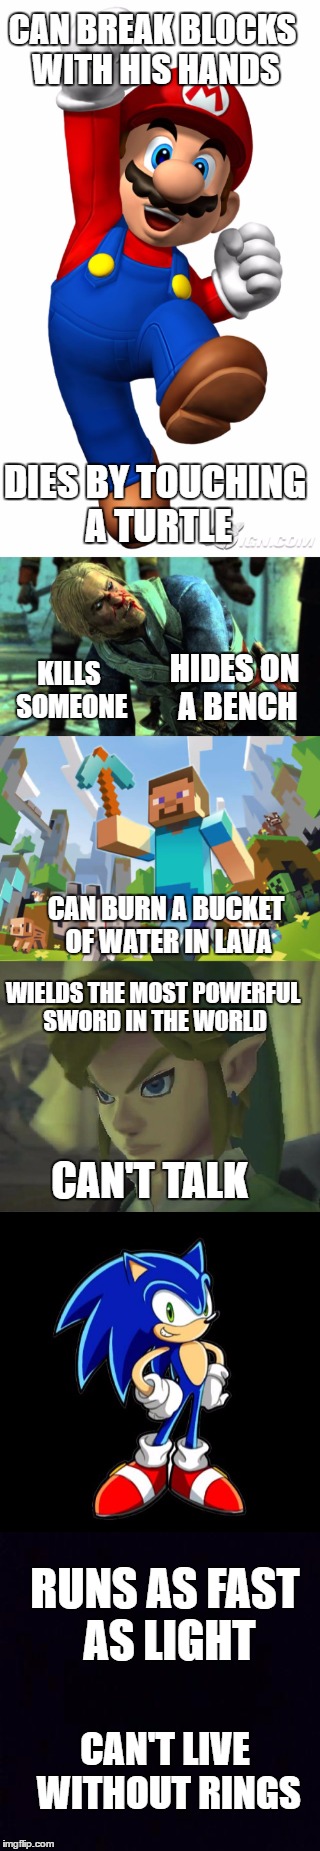 Videogame logic | CAN BREAK BLOCKS WITH HIS HANDS; DIES BY TOUCHING A TURTLE; KILLS SOMEONE; HIDES ON A BENCH; CAN BURN A BUCKET OF WATER IN LAVA; WIELDS THE MOST POWERFUL SWORD IN THE WORLD; CAN'T TALK; RUNS AS FAST AS LIGHT; CAN'T LIVE WITHOUT RINGS | image tagged in video games,super mario,assassins creed,sonic the hedgehog,the legend of zelda,minecraft | made w/ Imgflip meme maker